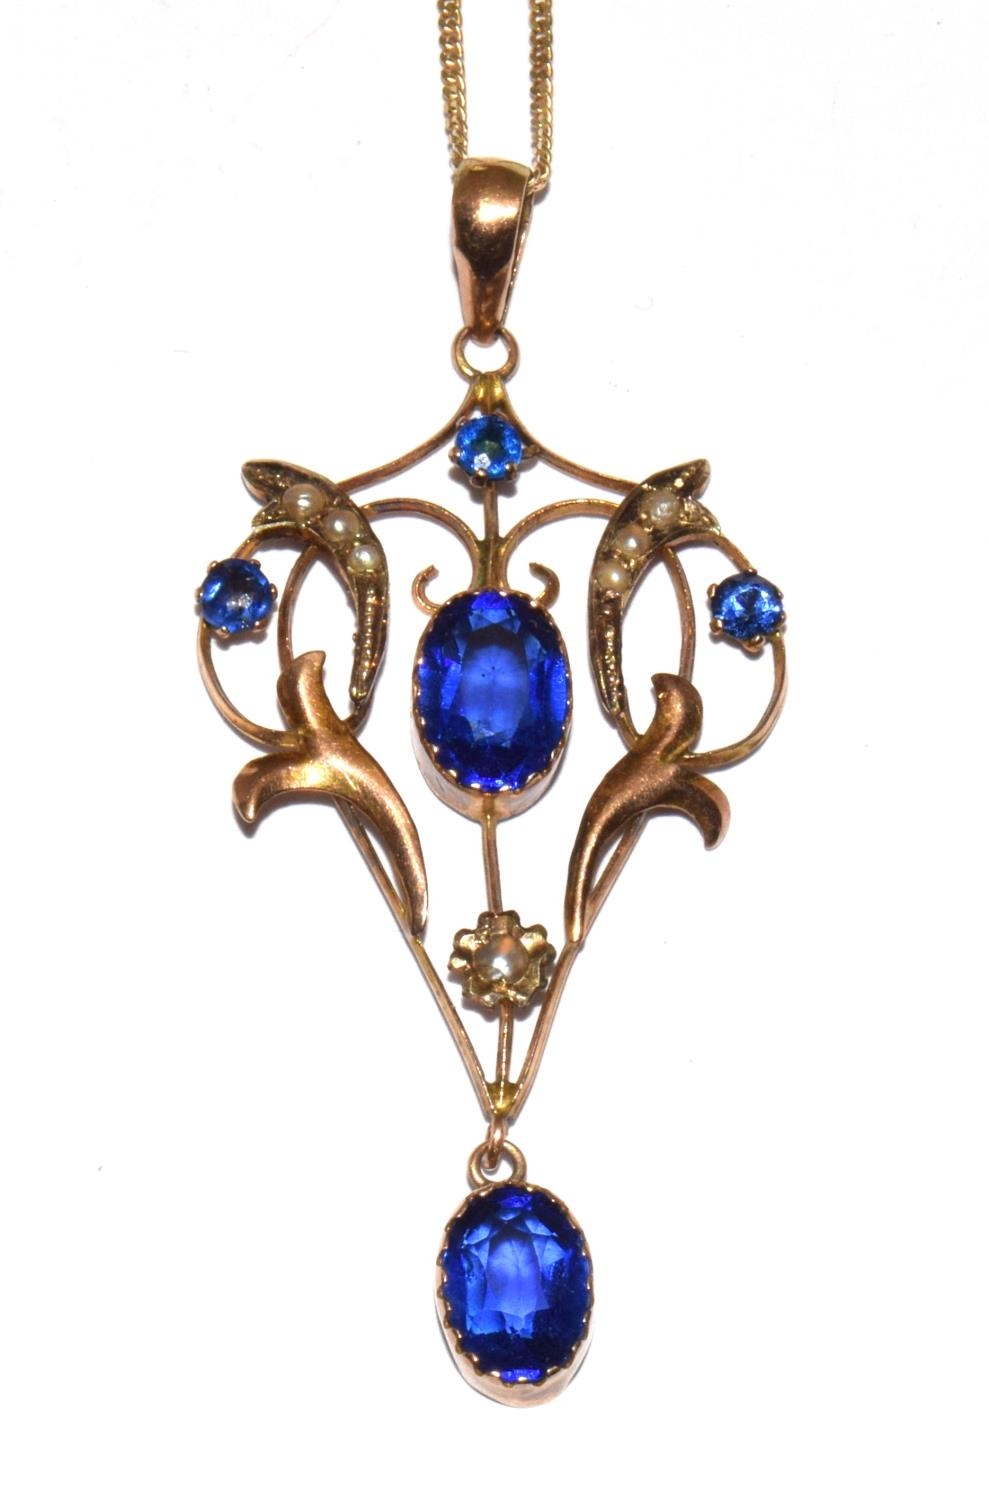 9ct gold Belle Epoque pendant set with blue stones and pearls on a gilded chain - Image 2 of 6